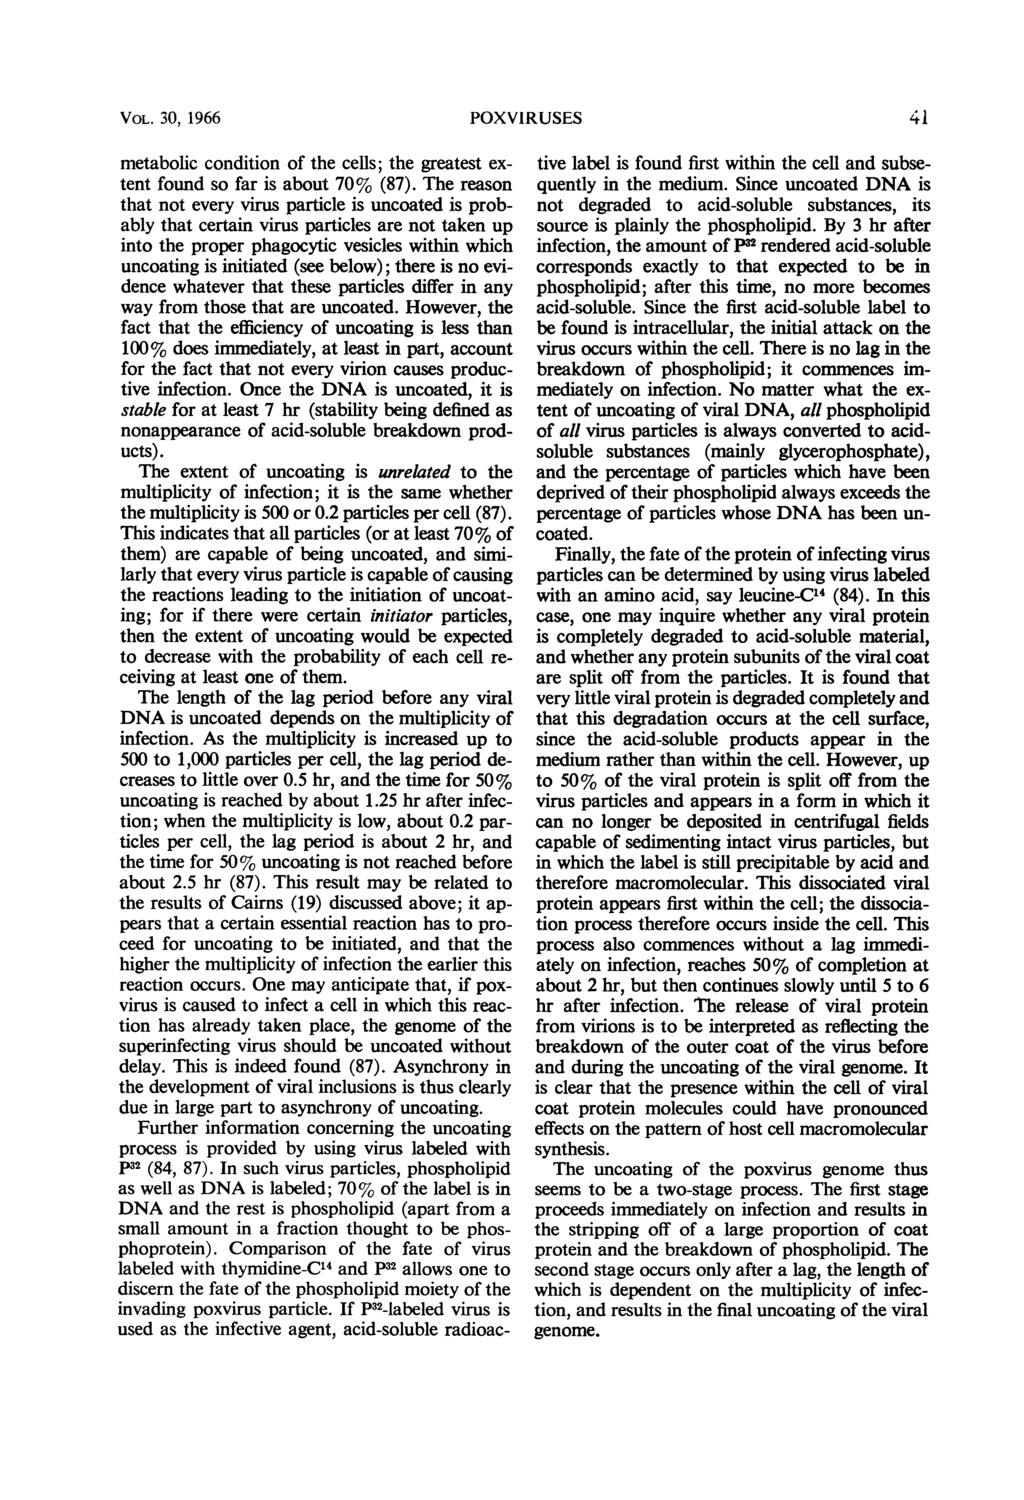 VOL. 30, 1966 POXVIRUSES 41 metabolic condition of the cells; the greatest extent found so far is about 70% (87).